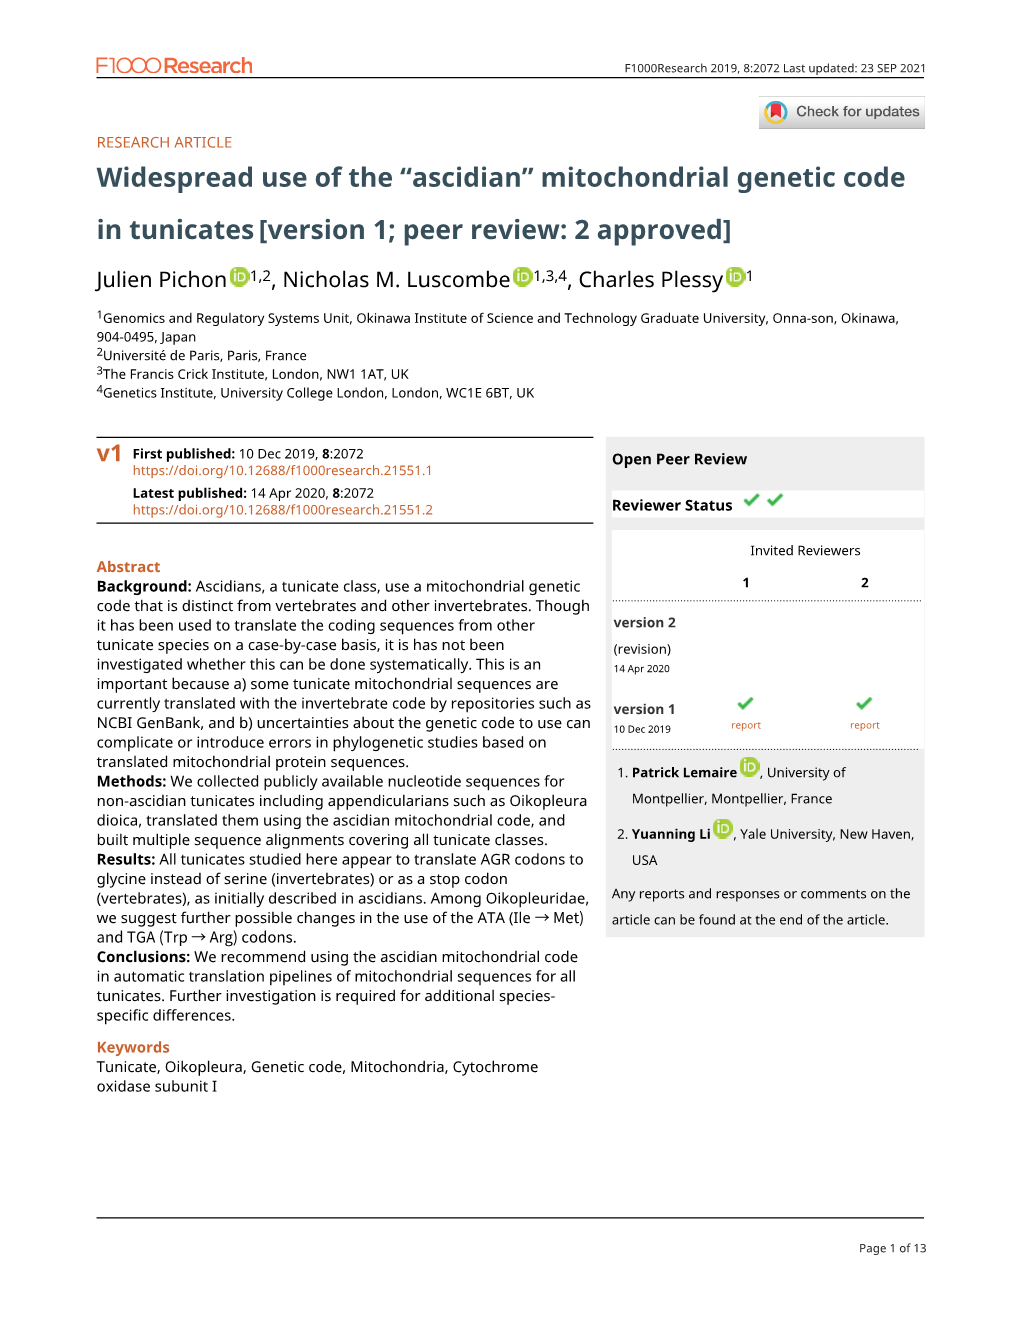 “Ascidian” Mitochondrial Genetic Code in Tunicates [Version 1; Peer Review: 2 Approved]